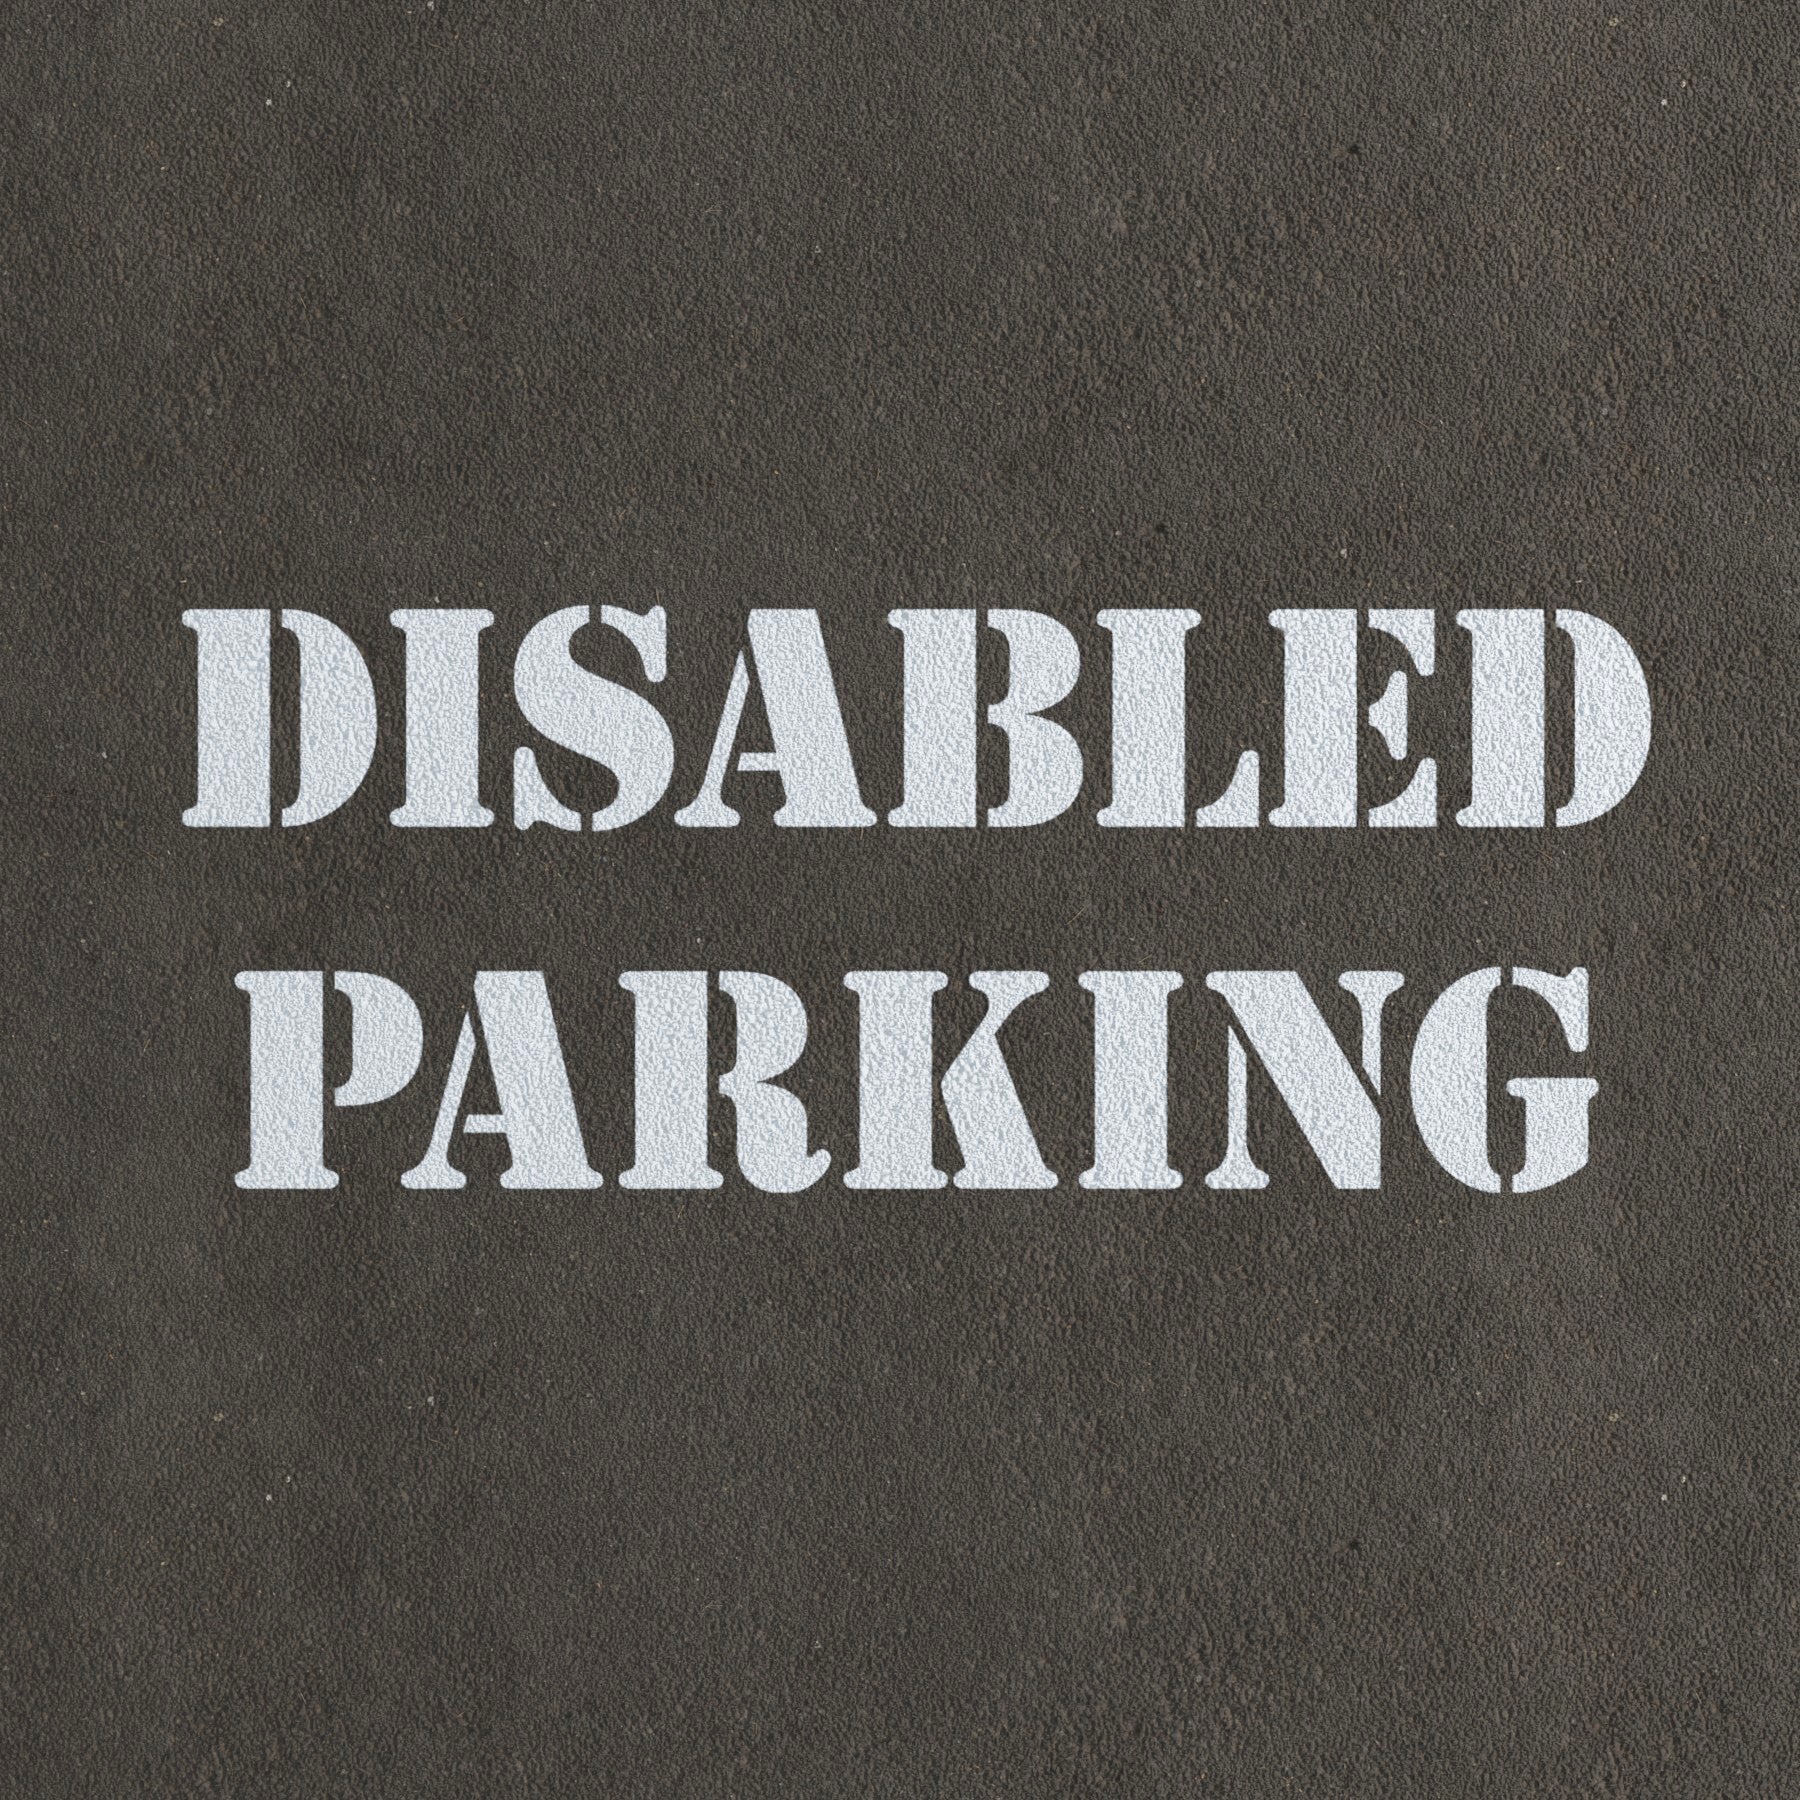 Disabled Parking Sign Stencil - Large Disabled Parking Text Template